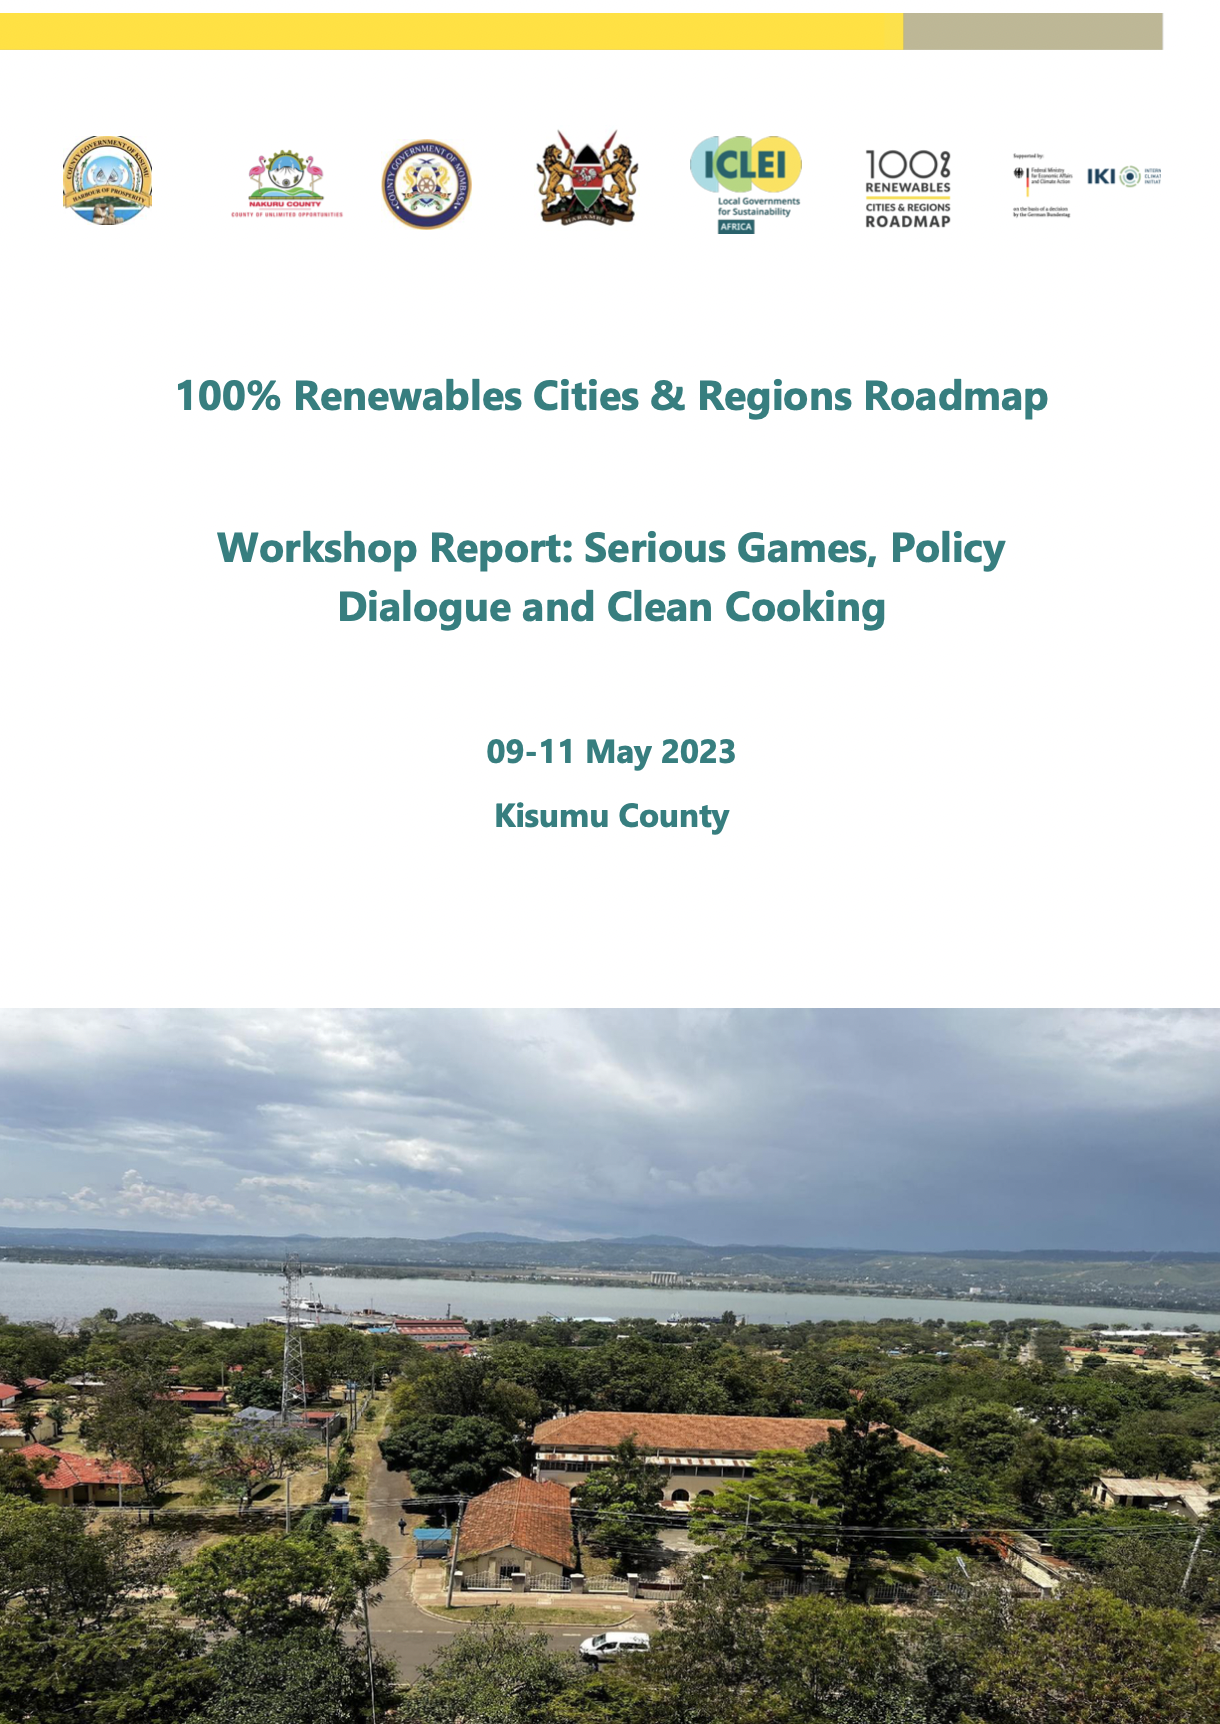 Workshop Report: Serious Games, Policy Dialogue and Clean Cooking